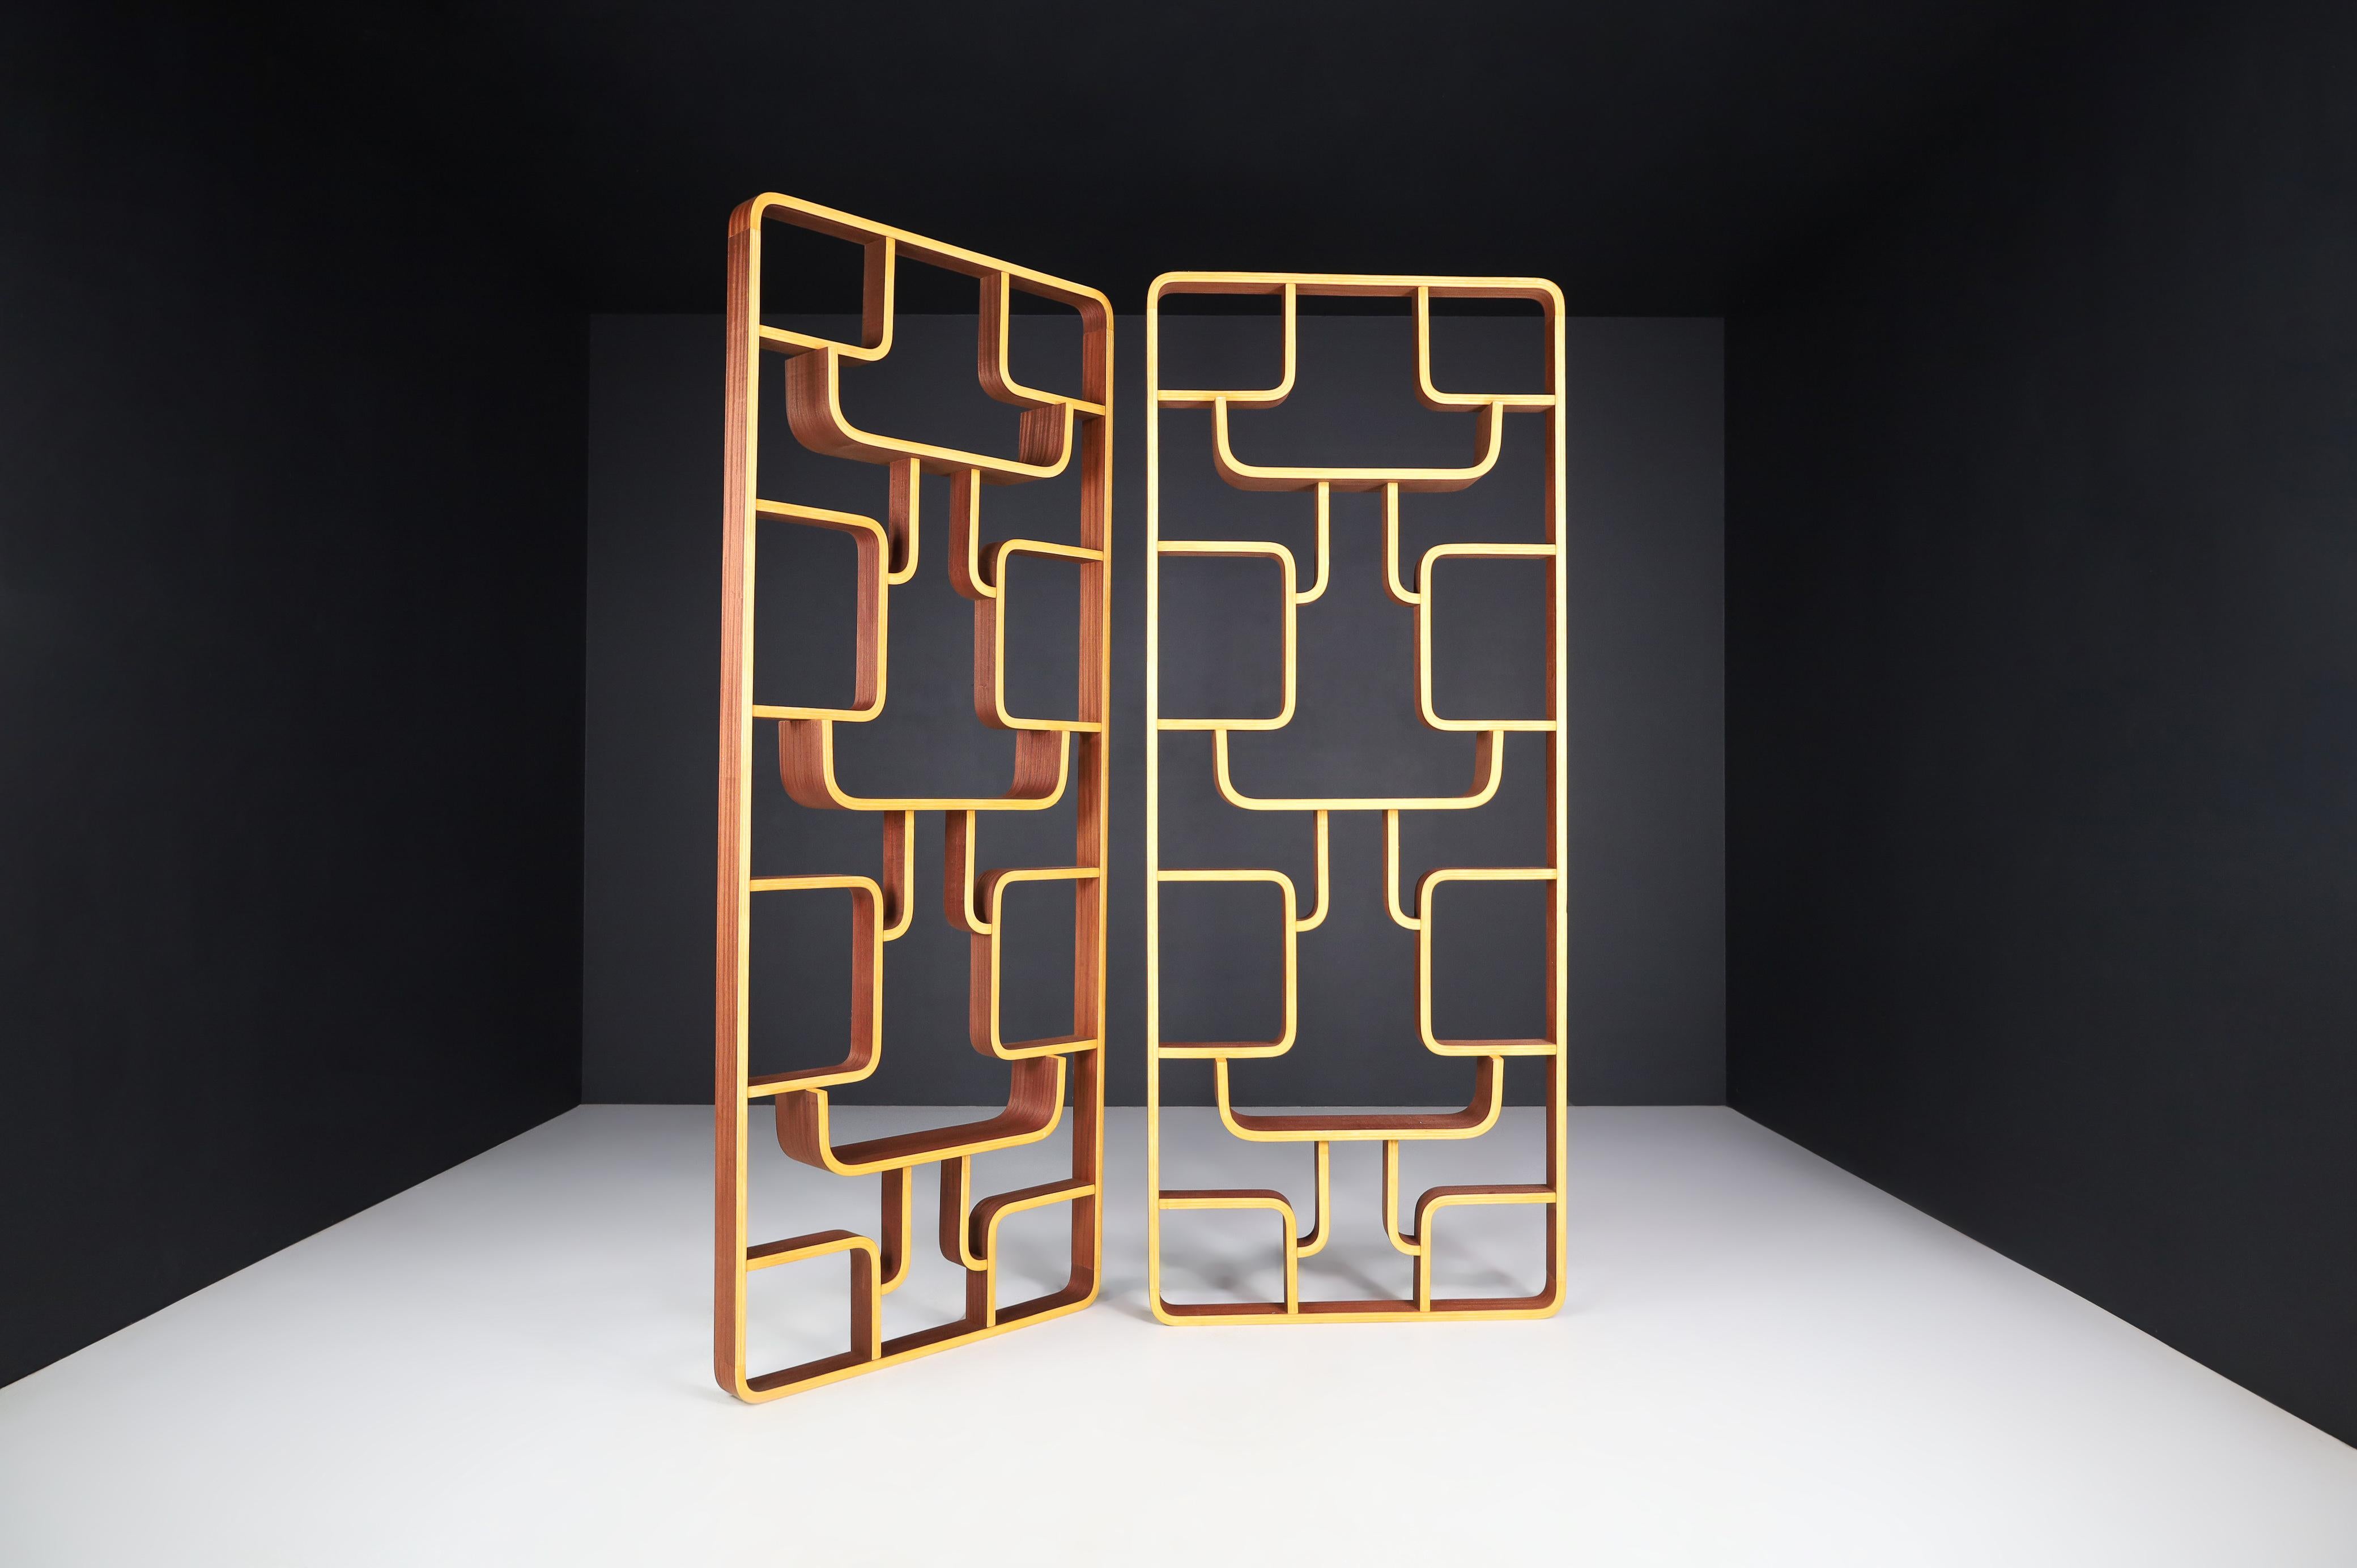 Mid-century room dividers in Bent-Wood by Ludvik Volak, Prague 1960s.

We have acquired a memorable room divider from a villa in Prague that can be used as a wall-mounted shelving unit or room divider. The piece features round edges in blond color